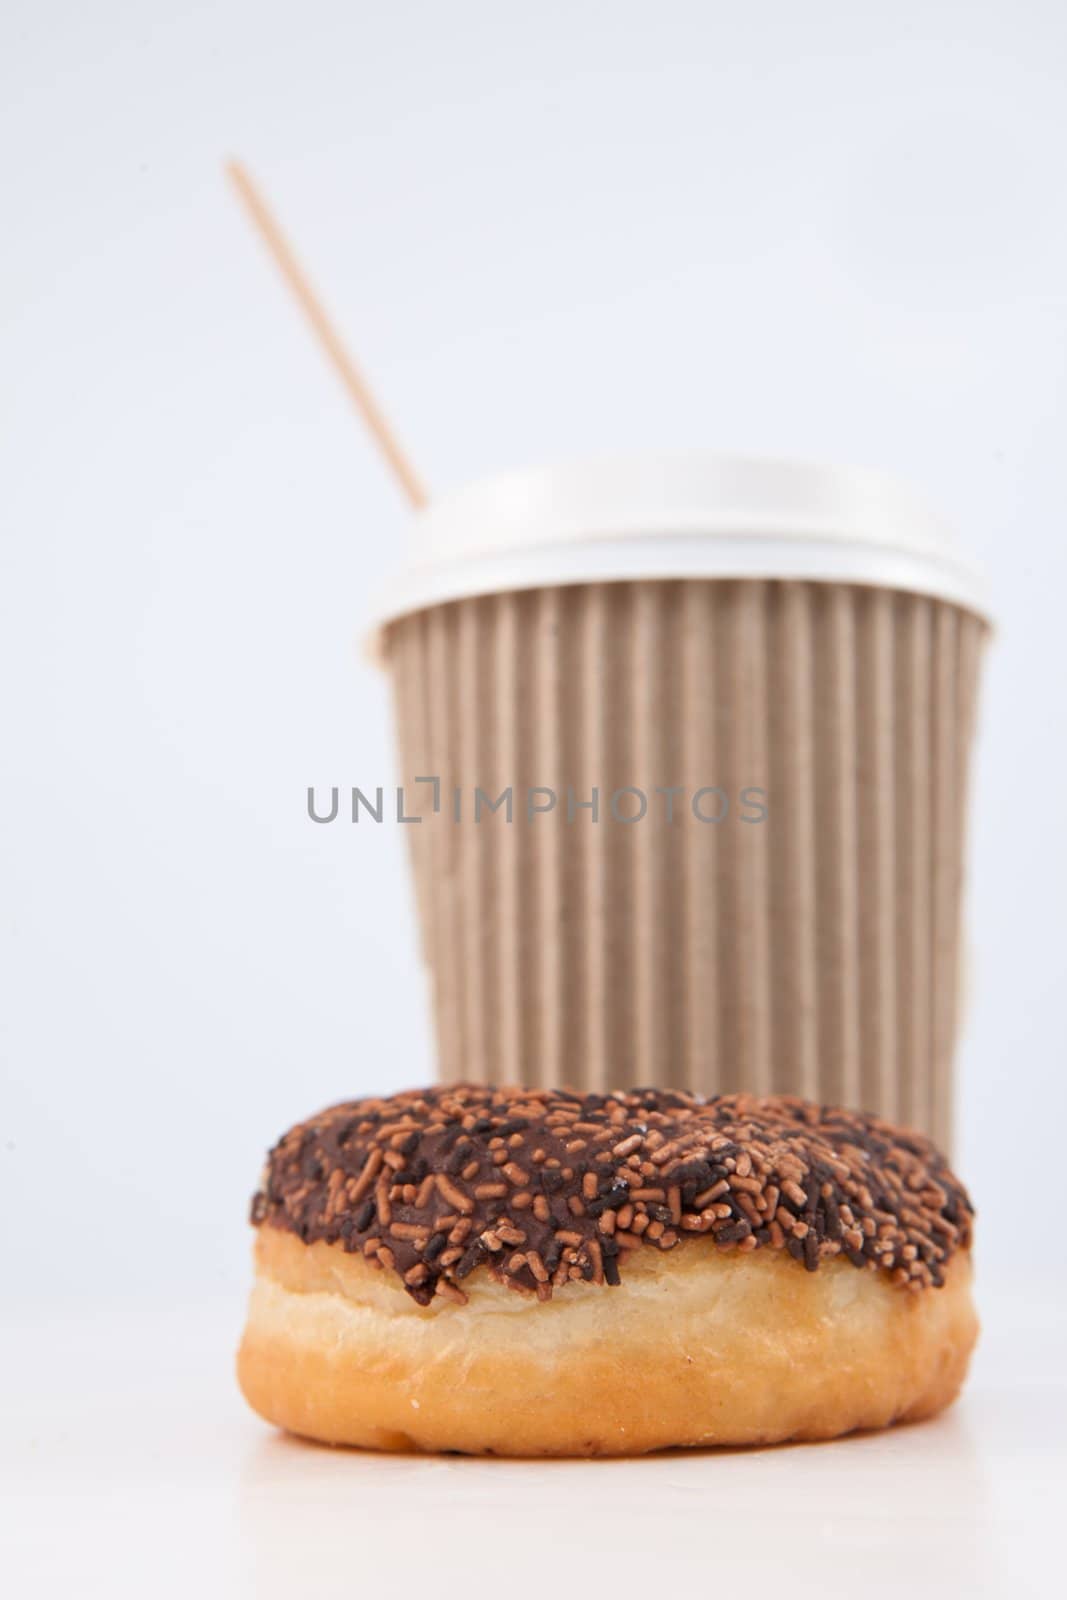 A doughnut and a cup of coffee placed together by Wavebreakmedia